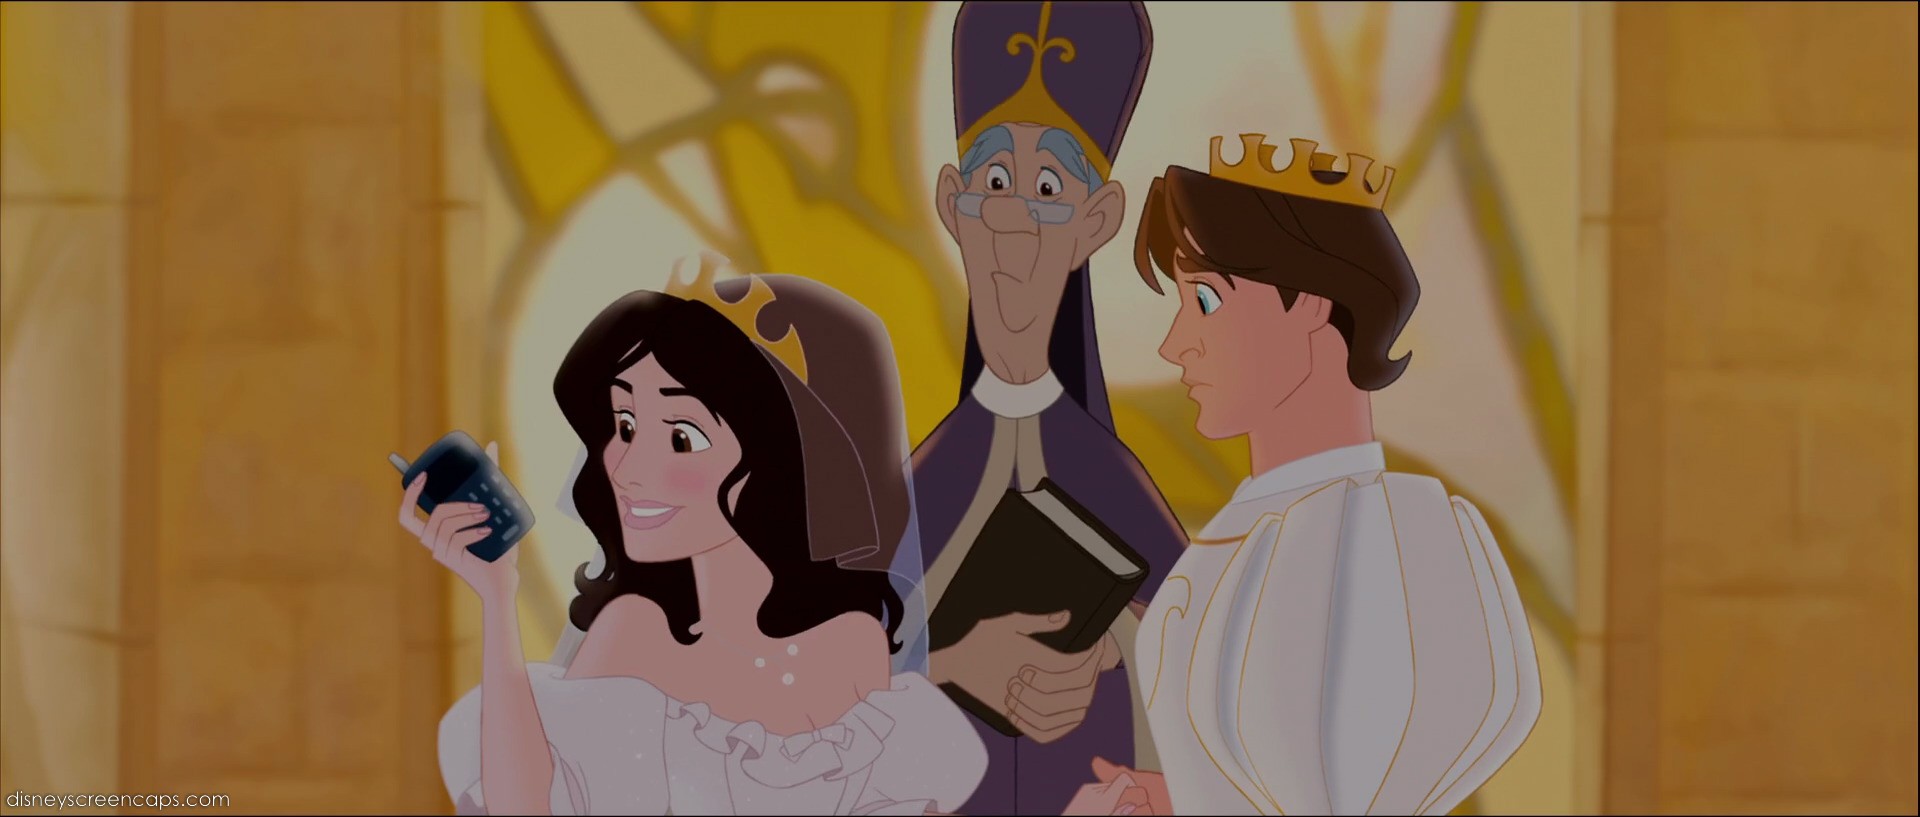 Nancy Tremaine (voice by Idina Menzel) and Prince Edward (voiced by James Marsden) getting married in Andalasia Enchanted picture image